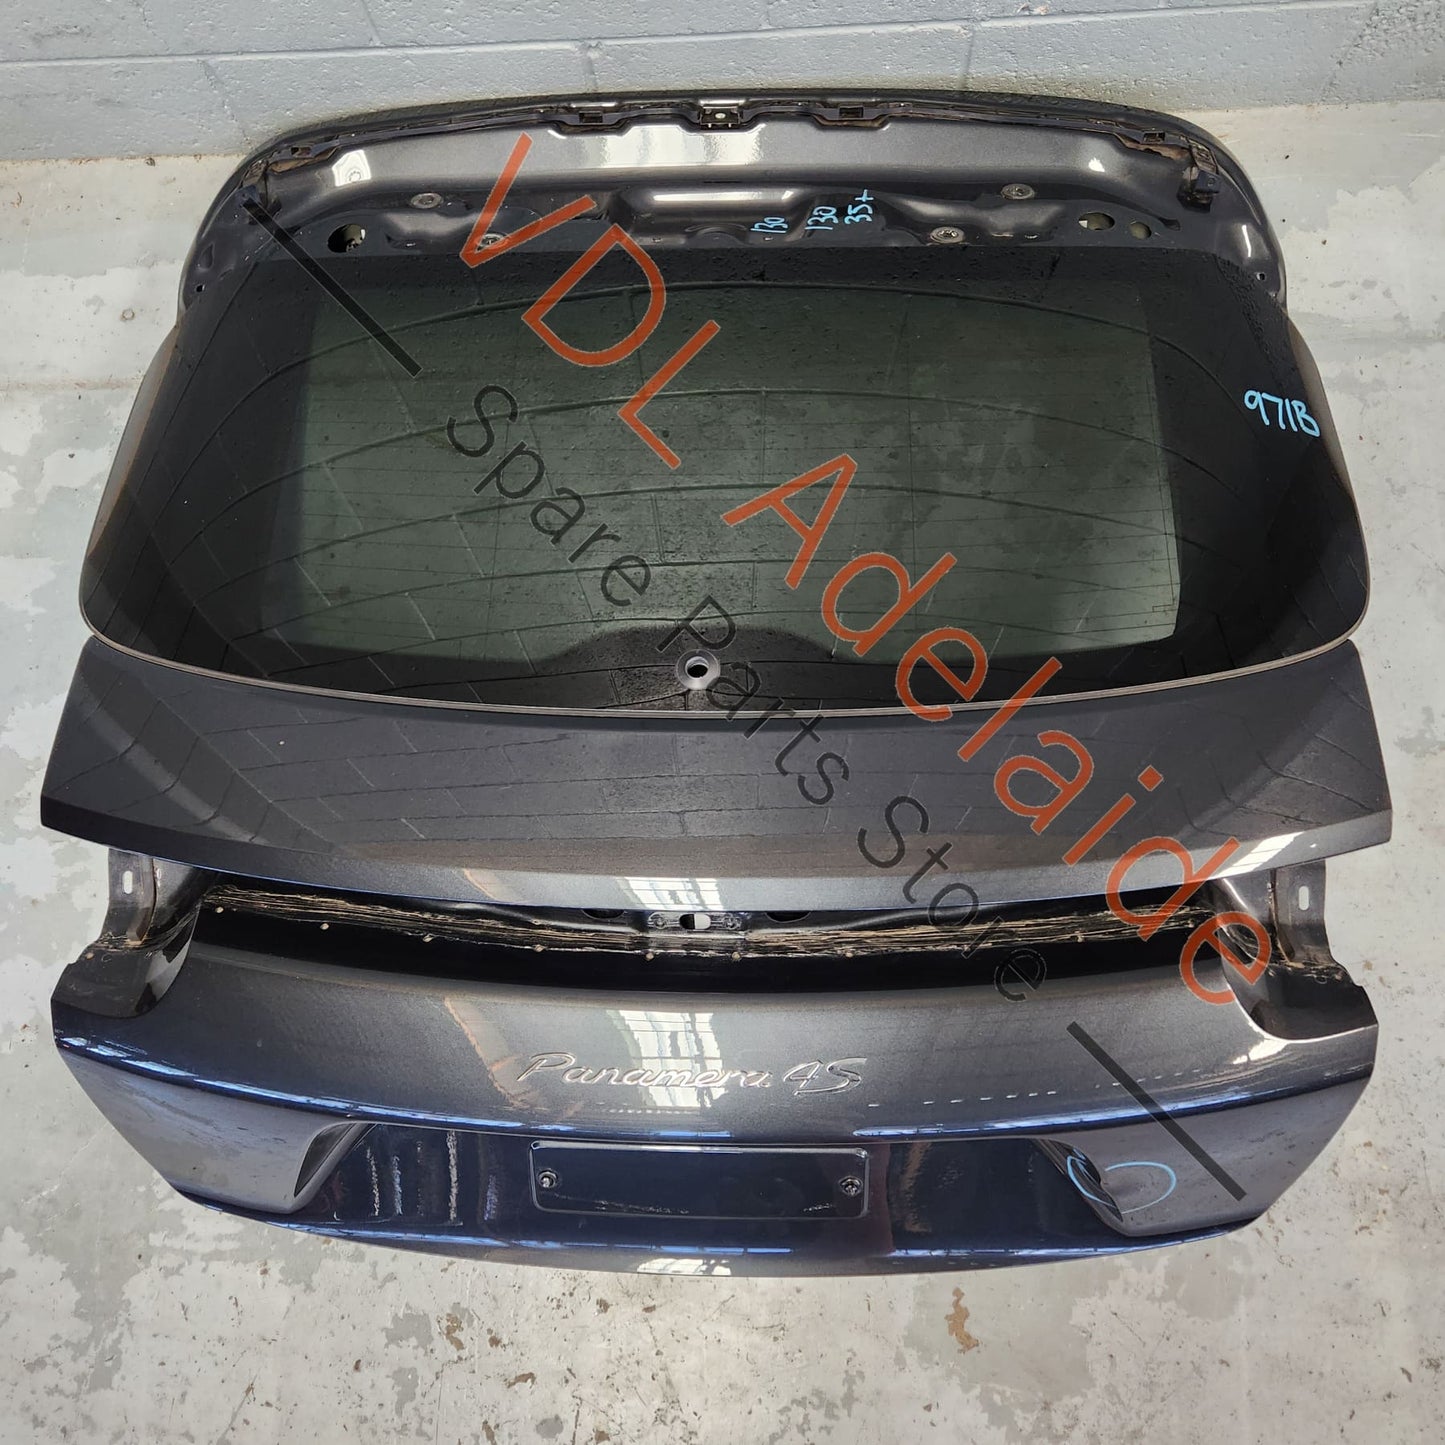 Porsche Panamera Turismo Rear Hatch Boot Trunk Panel Lid 974827025AYGRV 974827025CYGRV     Includes Glass & Badges. 1 x Small dent near number plate mount.